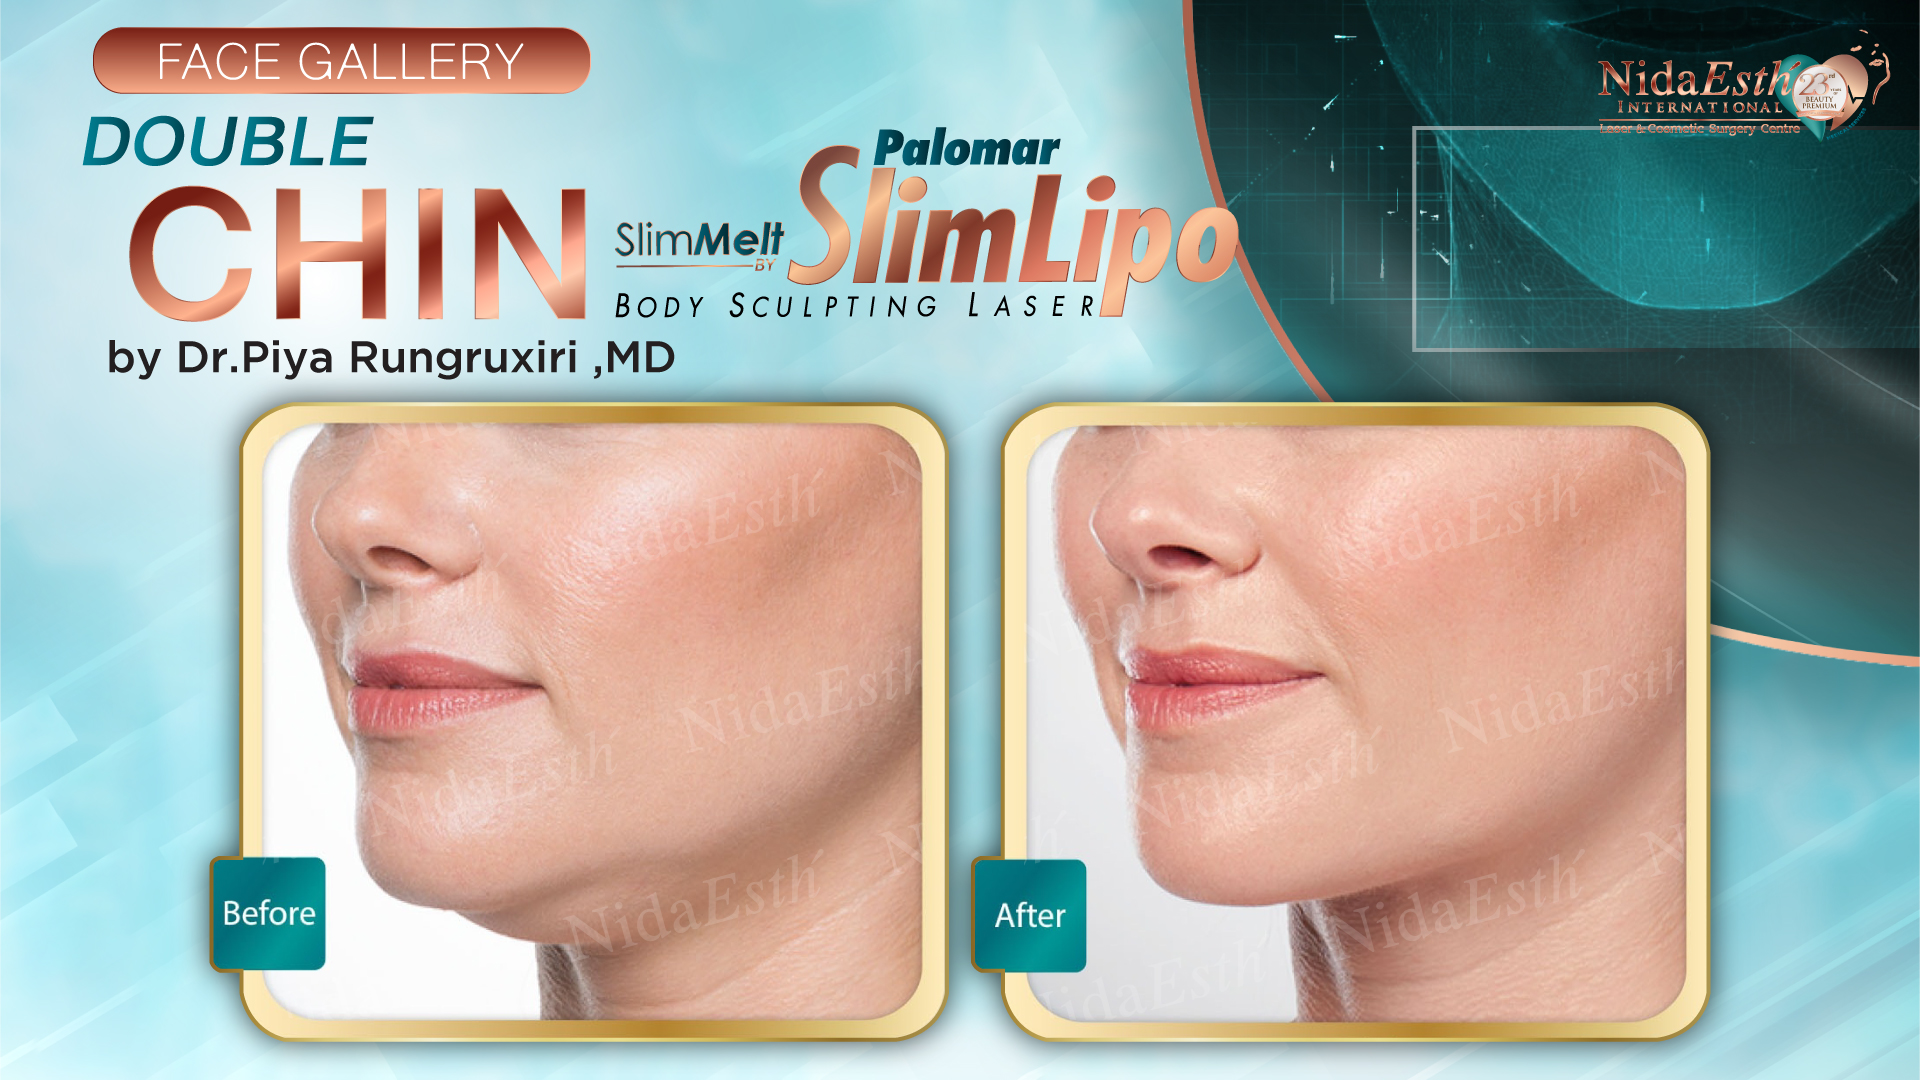 Double Chin Liposuction by Slim Melt